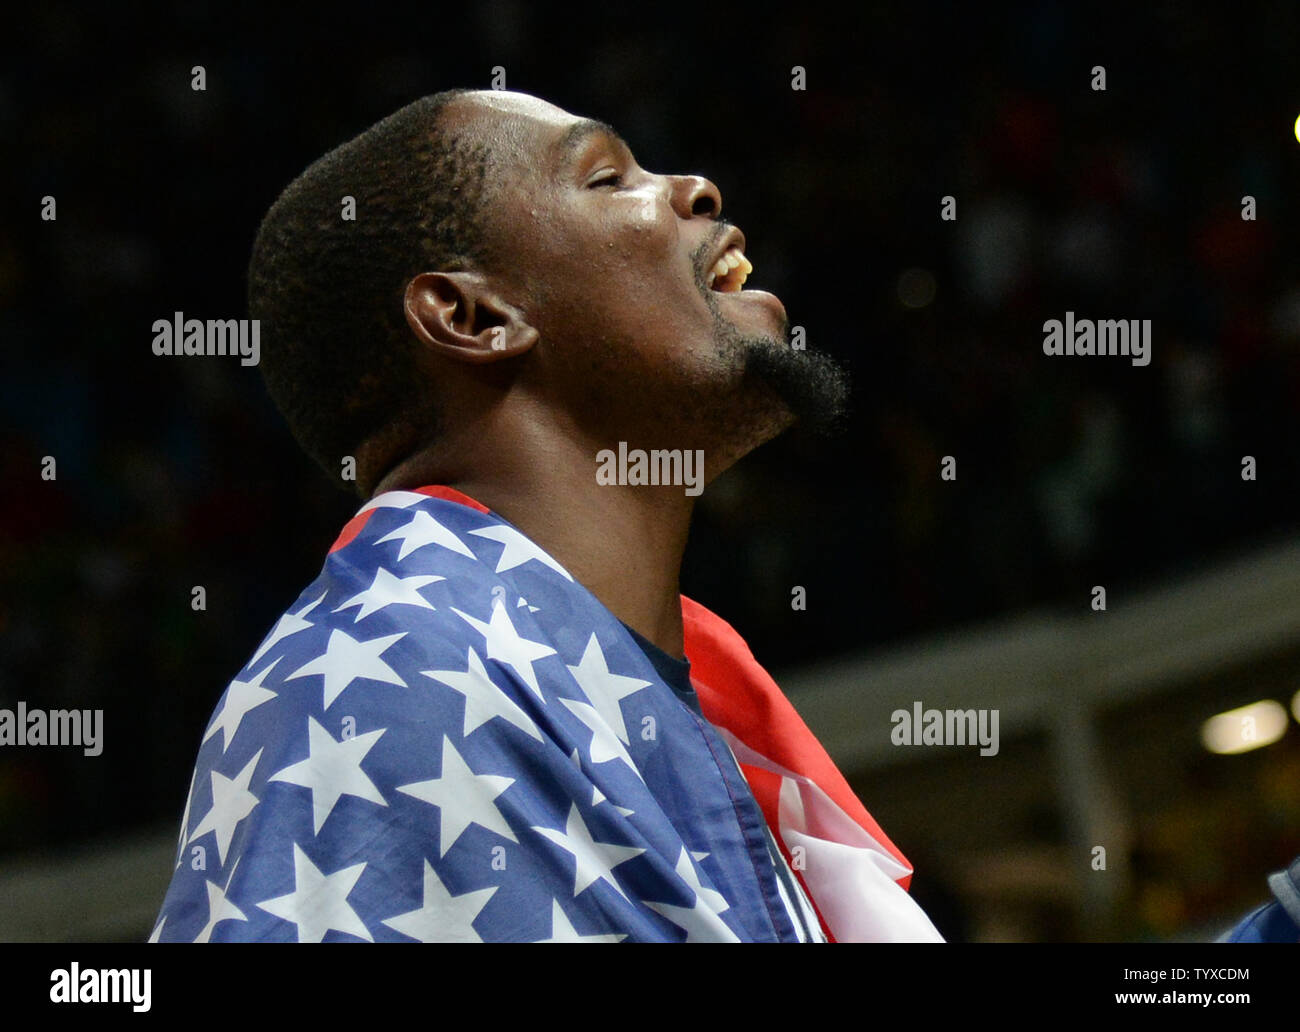 Kevin Durant of the United States celebrates after the game against Serbia in the Men's Basketball gold medal game between Serbia and the United States at Carioca Arena 1 at the 2016 Rio Summer Olympics in Rio de Janeiro, Brazil, on August 21, 2016. The United States defeated Serbia 96-66 to win its third consecutive gold medal.  Photo by Kevin Dietsch/UPI Stock Photo